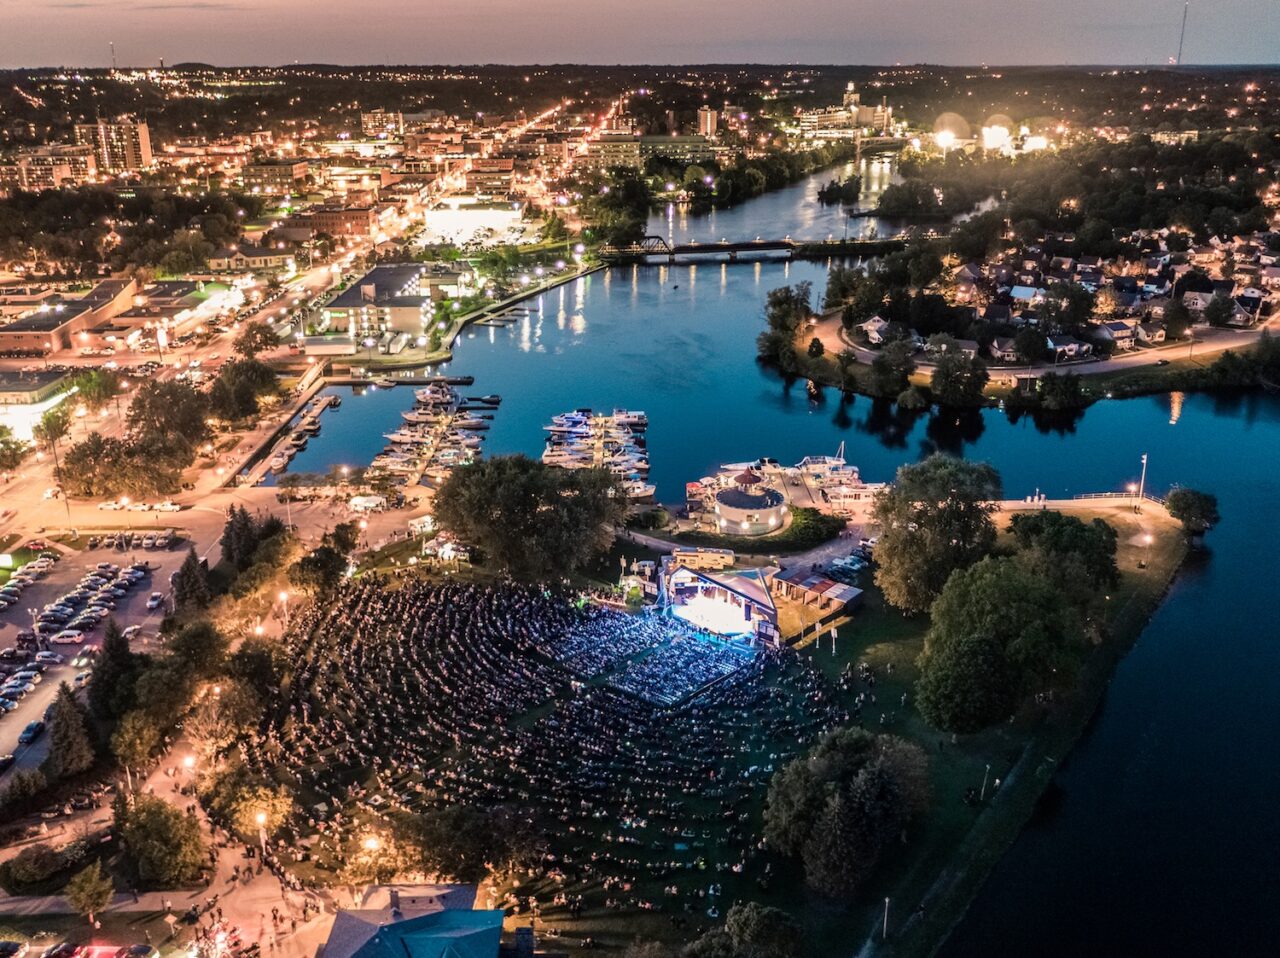 an arieal shot of Musicfest concert at night, with a park full of people